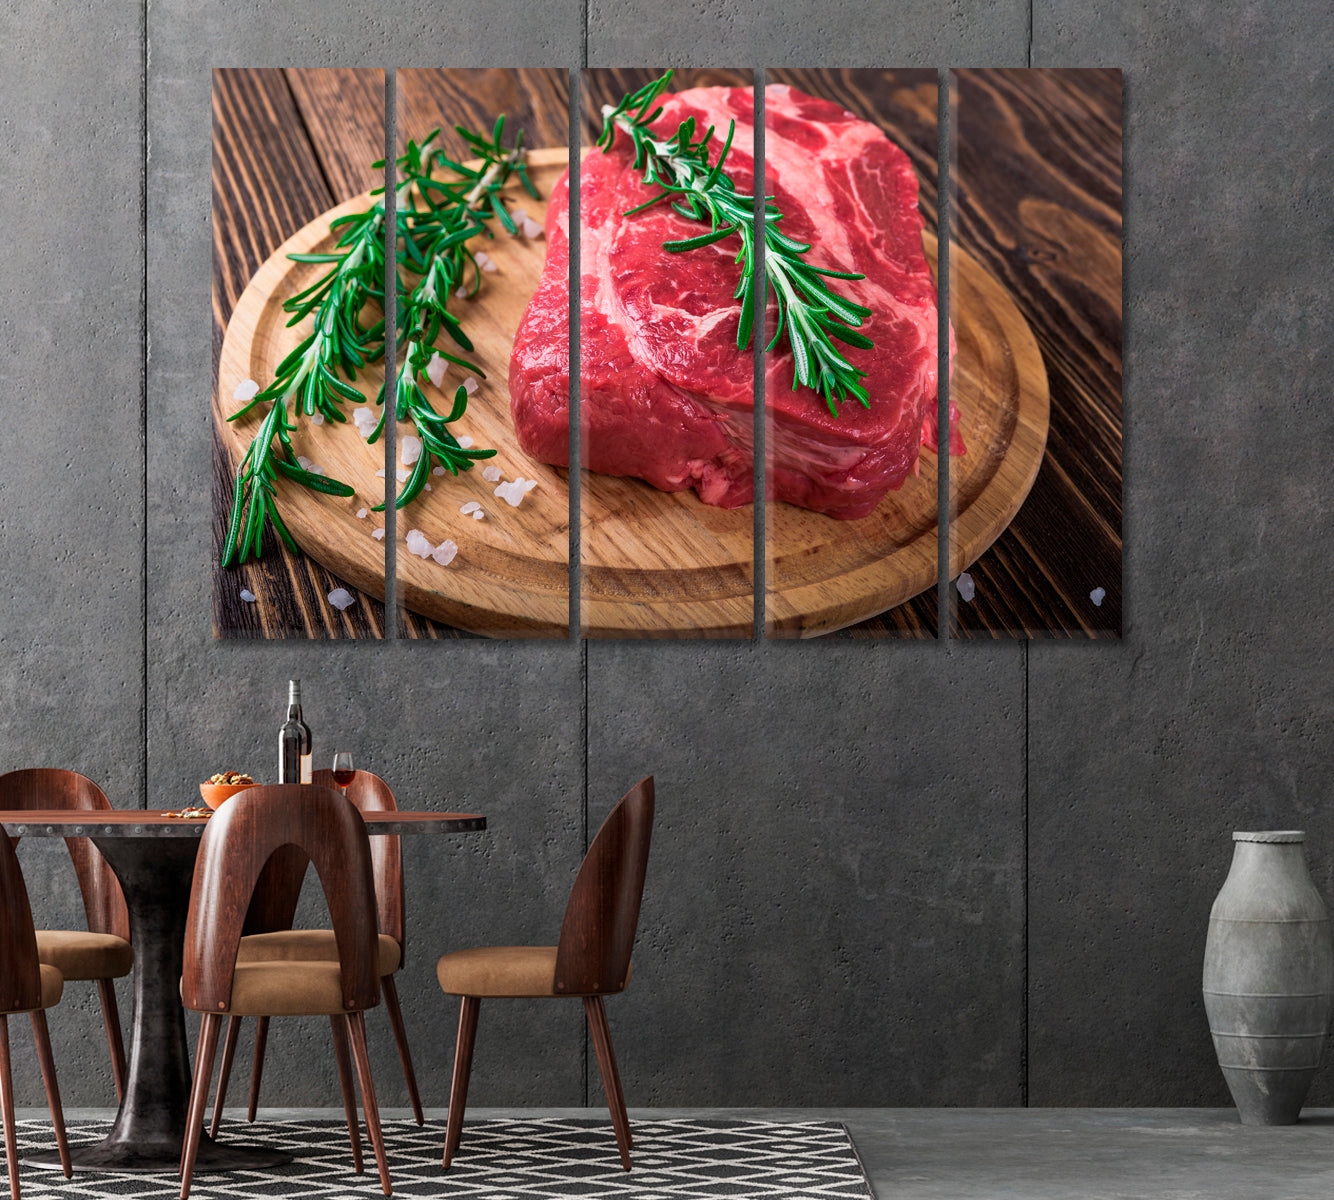 Raw Beef Steak with Rosemary Canvas Print-Canvas Print-CetArt-1 Panel-24x16 inches-CetArt